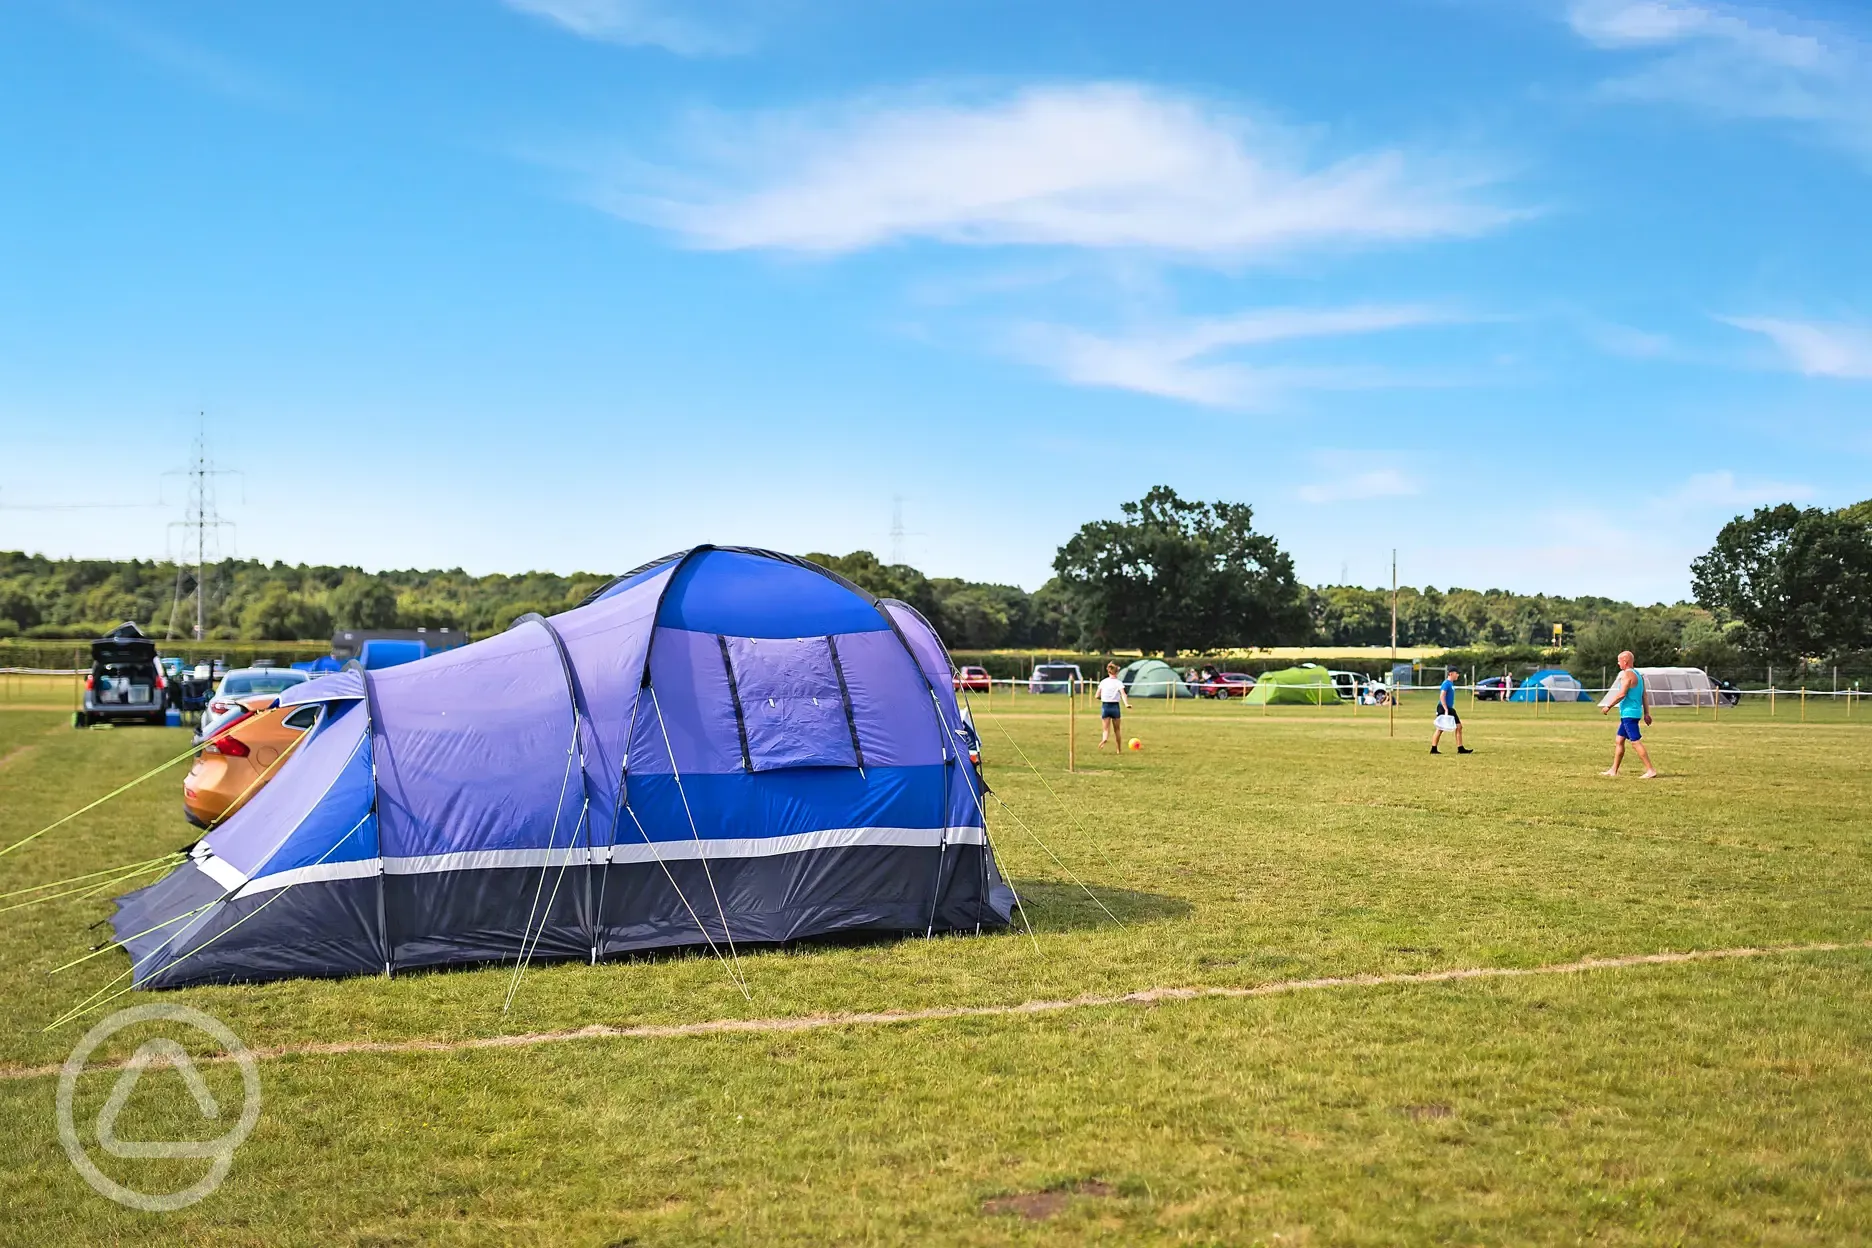 Non electric grass pitches